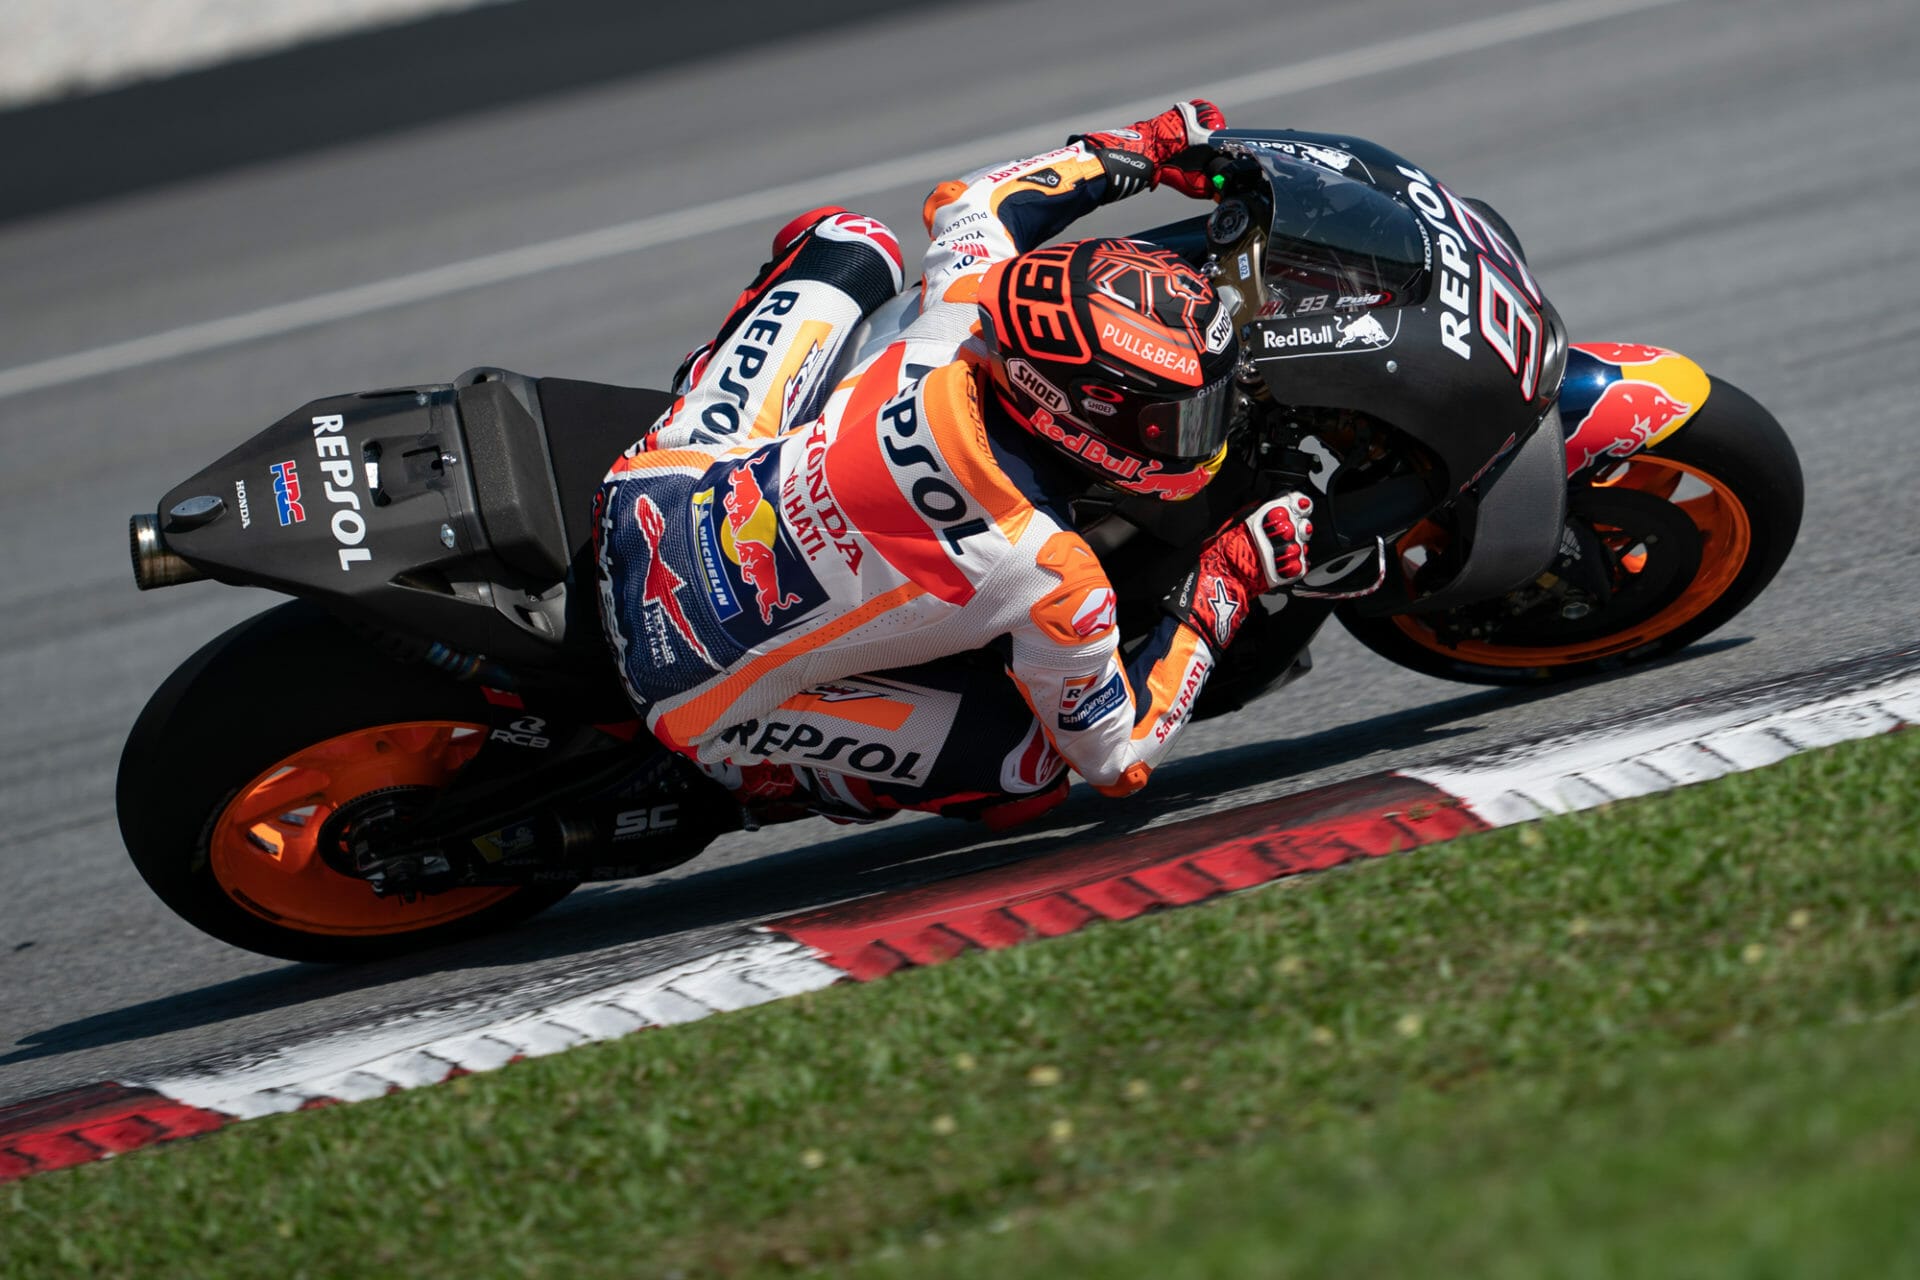 Marc Marquez, still in hospital after surgery
- also in the MOTORCYCLES.NEWS APP